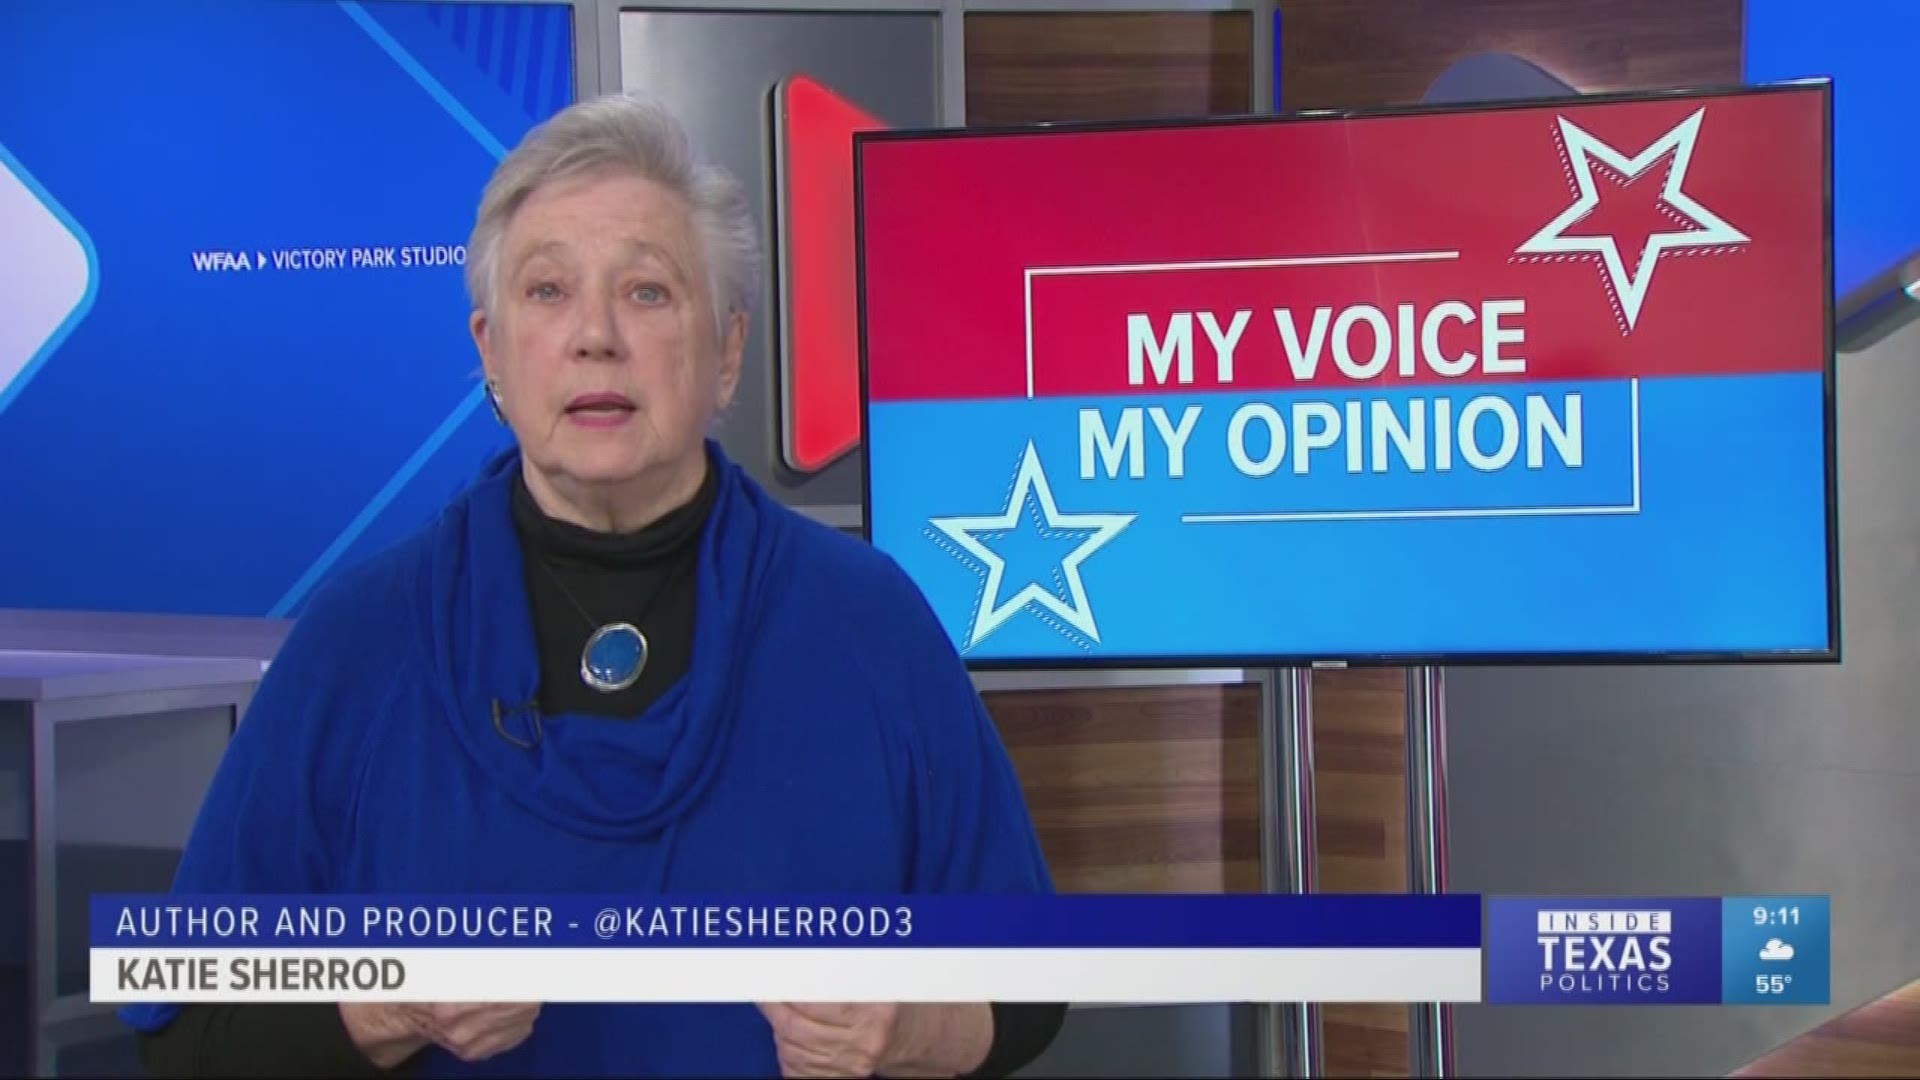 With this week’s My Voice, My Opinion, author and producer Katie Sherrod explains how separating the spin from facts is even harder during the impeachment process.